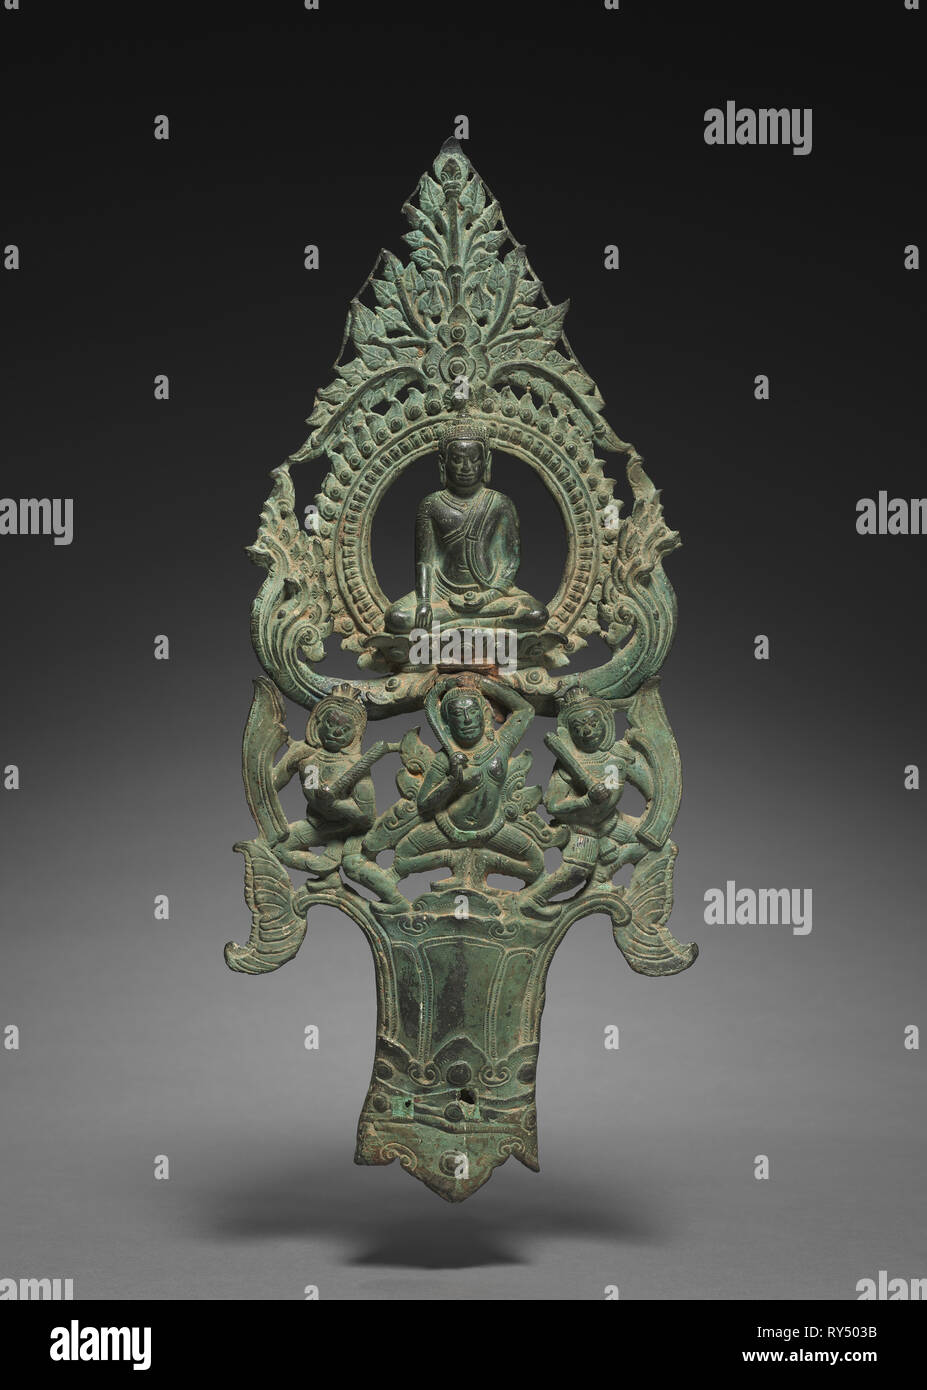 Portable icon of Shakyamuni Buddha in the Earth-touching gesture, late 1100s–early 1200s. Cambodia, reign of Jayavarman 7th. Bronze; overall: 42 x 18.5 x 3 cm (16 9/16 x 7 5/16 x 1 3/16 in Stock Photo